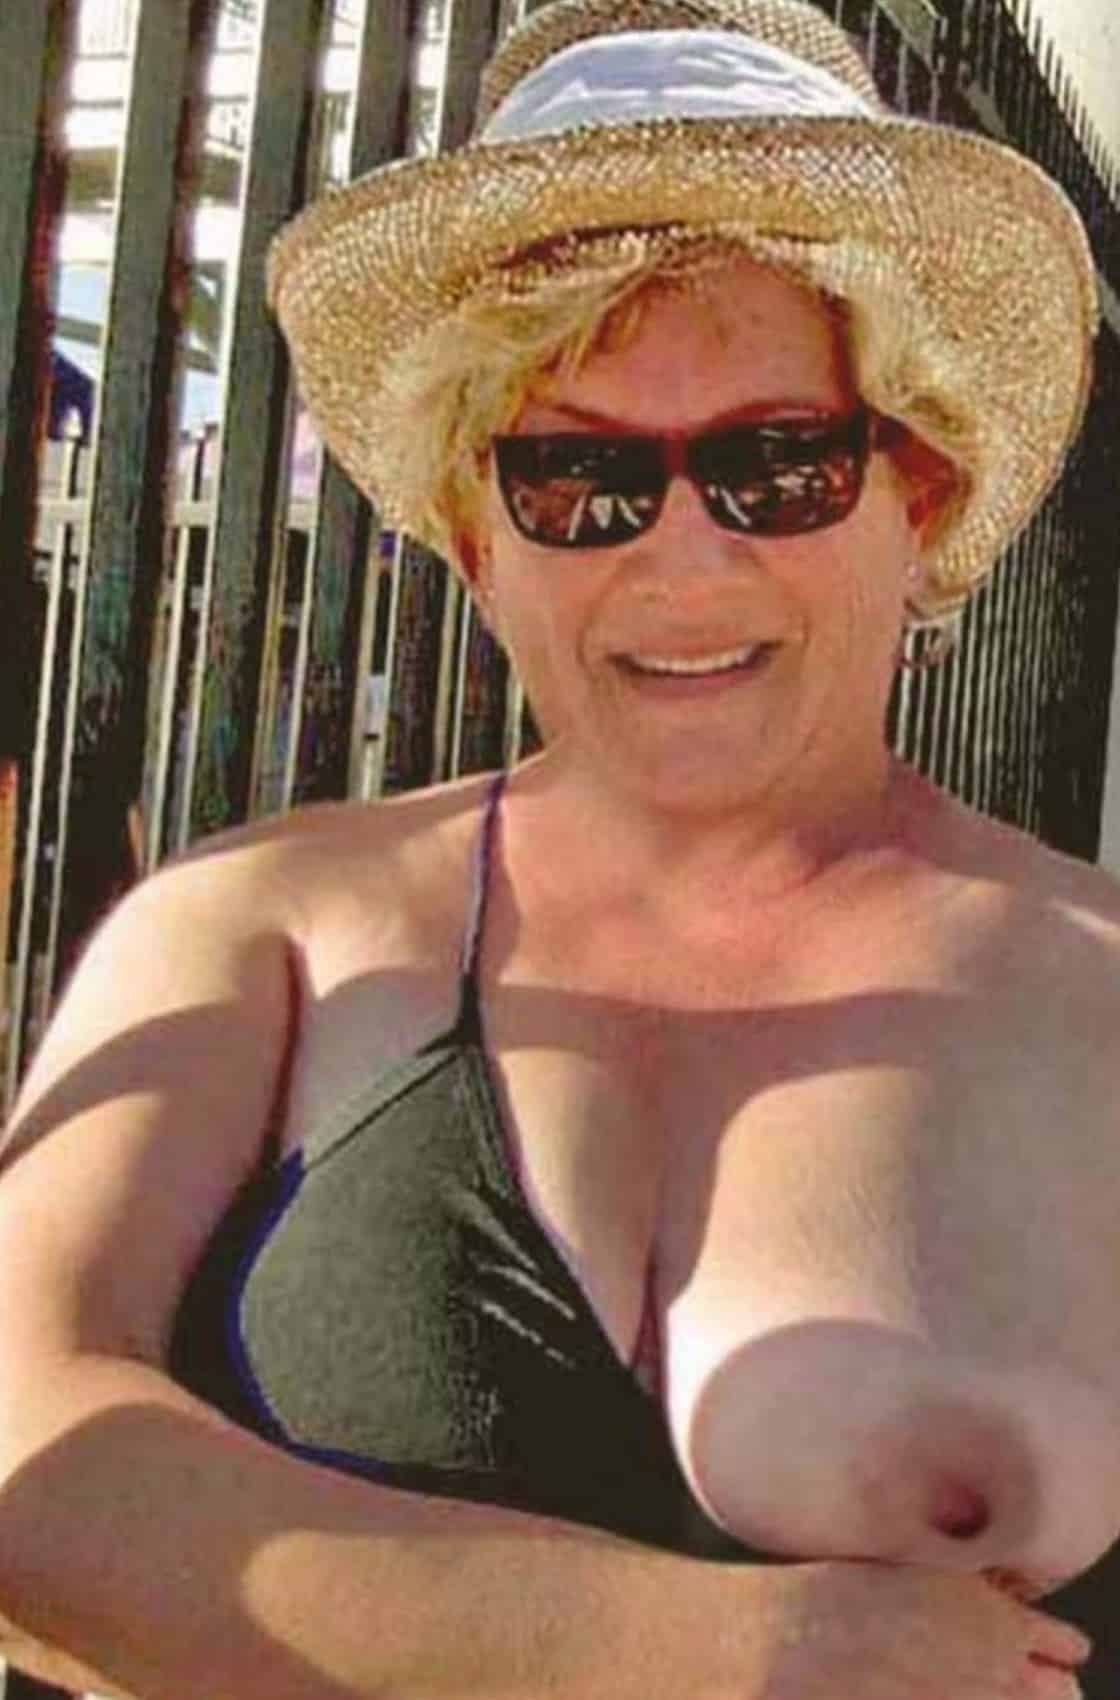 Boobs Flash Pics: Mature natural grandmother Mature grandmother in public flashing one natural boob for husband and his best friend.